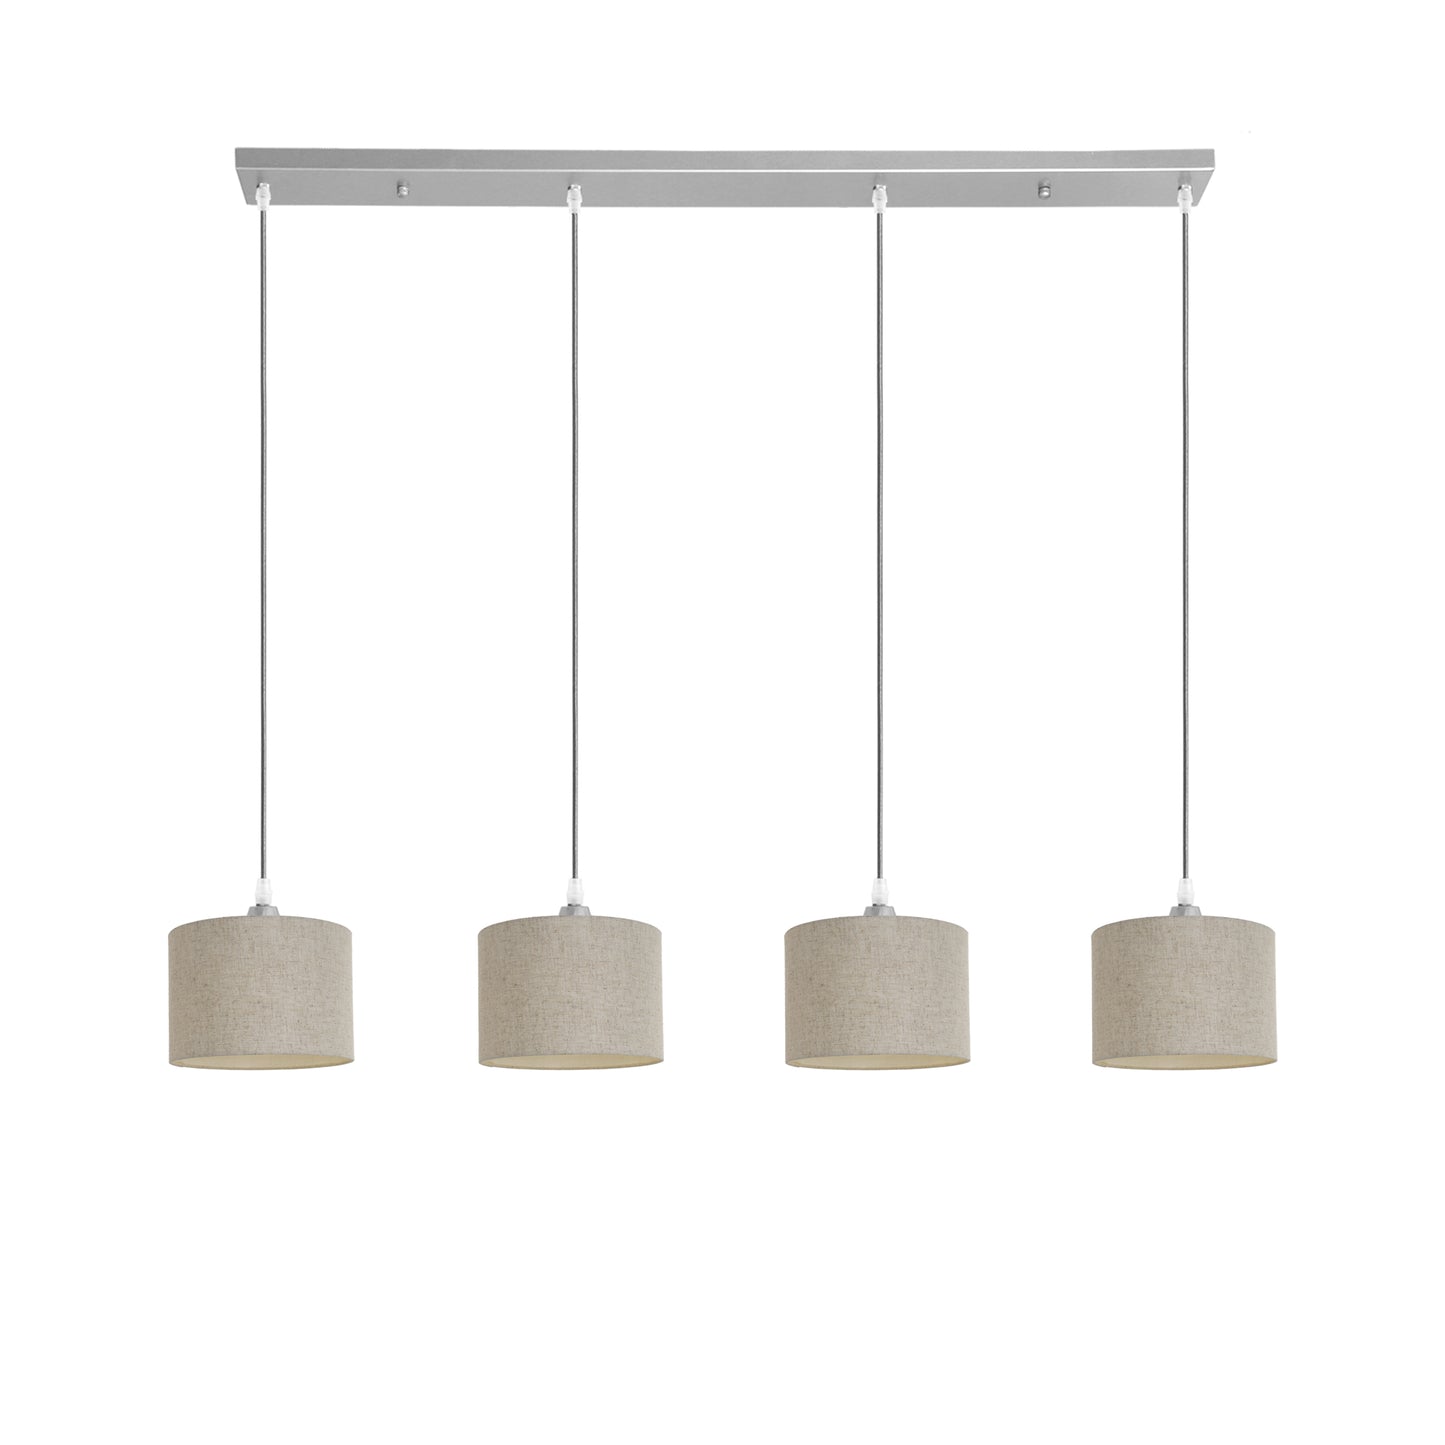 Murano 4 Light Silver bar with woven hand made fabric shades